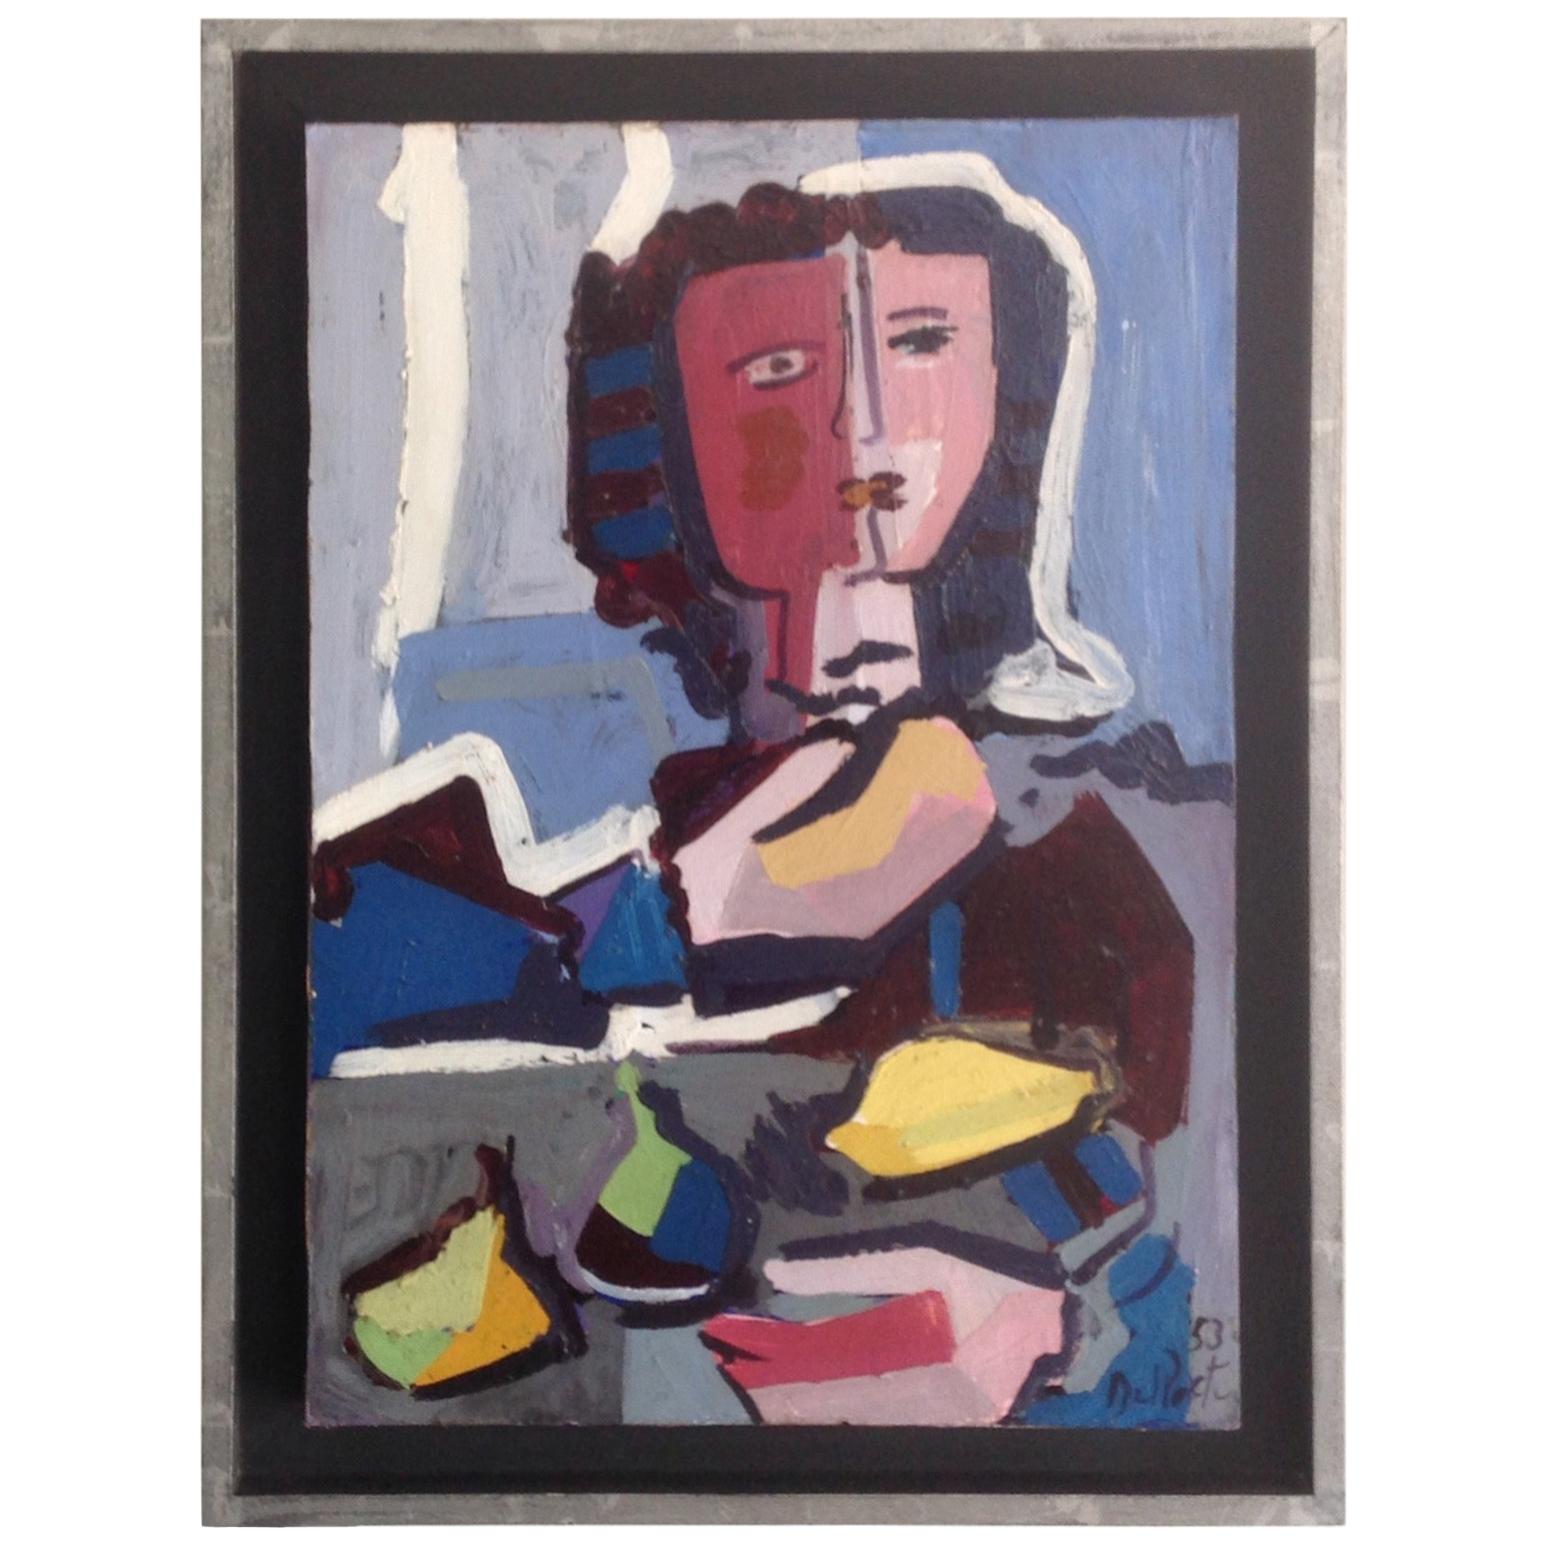 Juan Del Prete Abstract Figural Painting from 1953 in Vibrant Colors